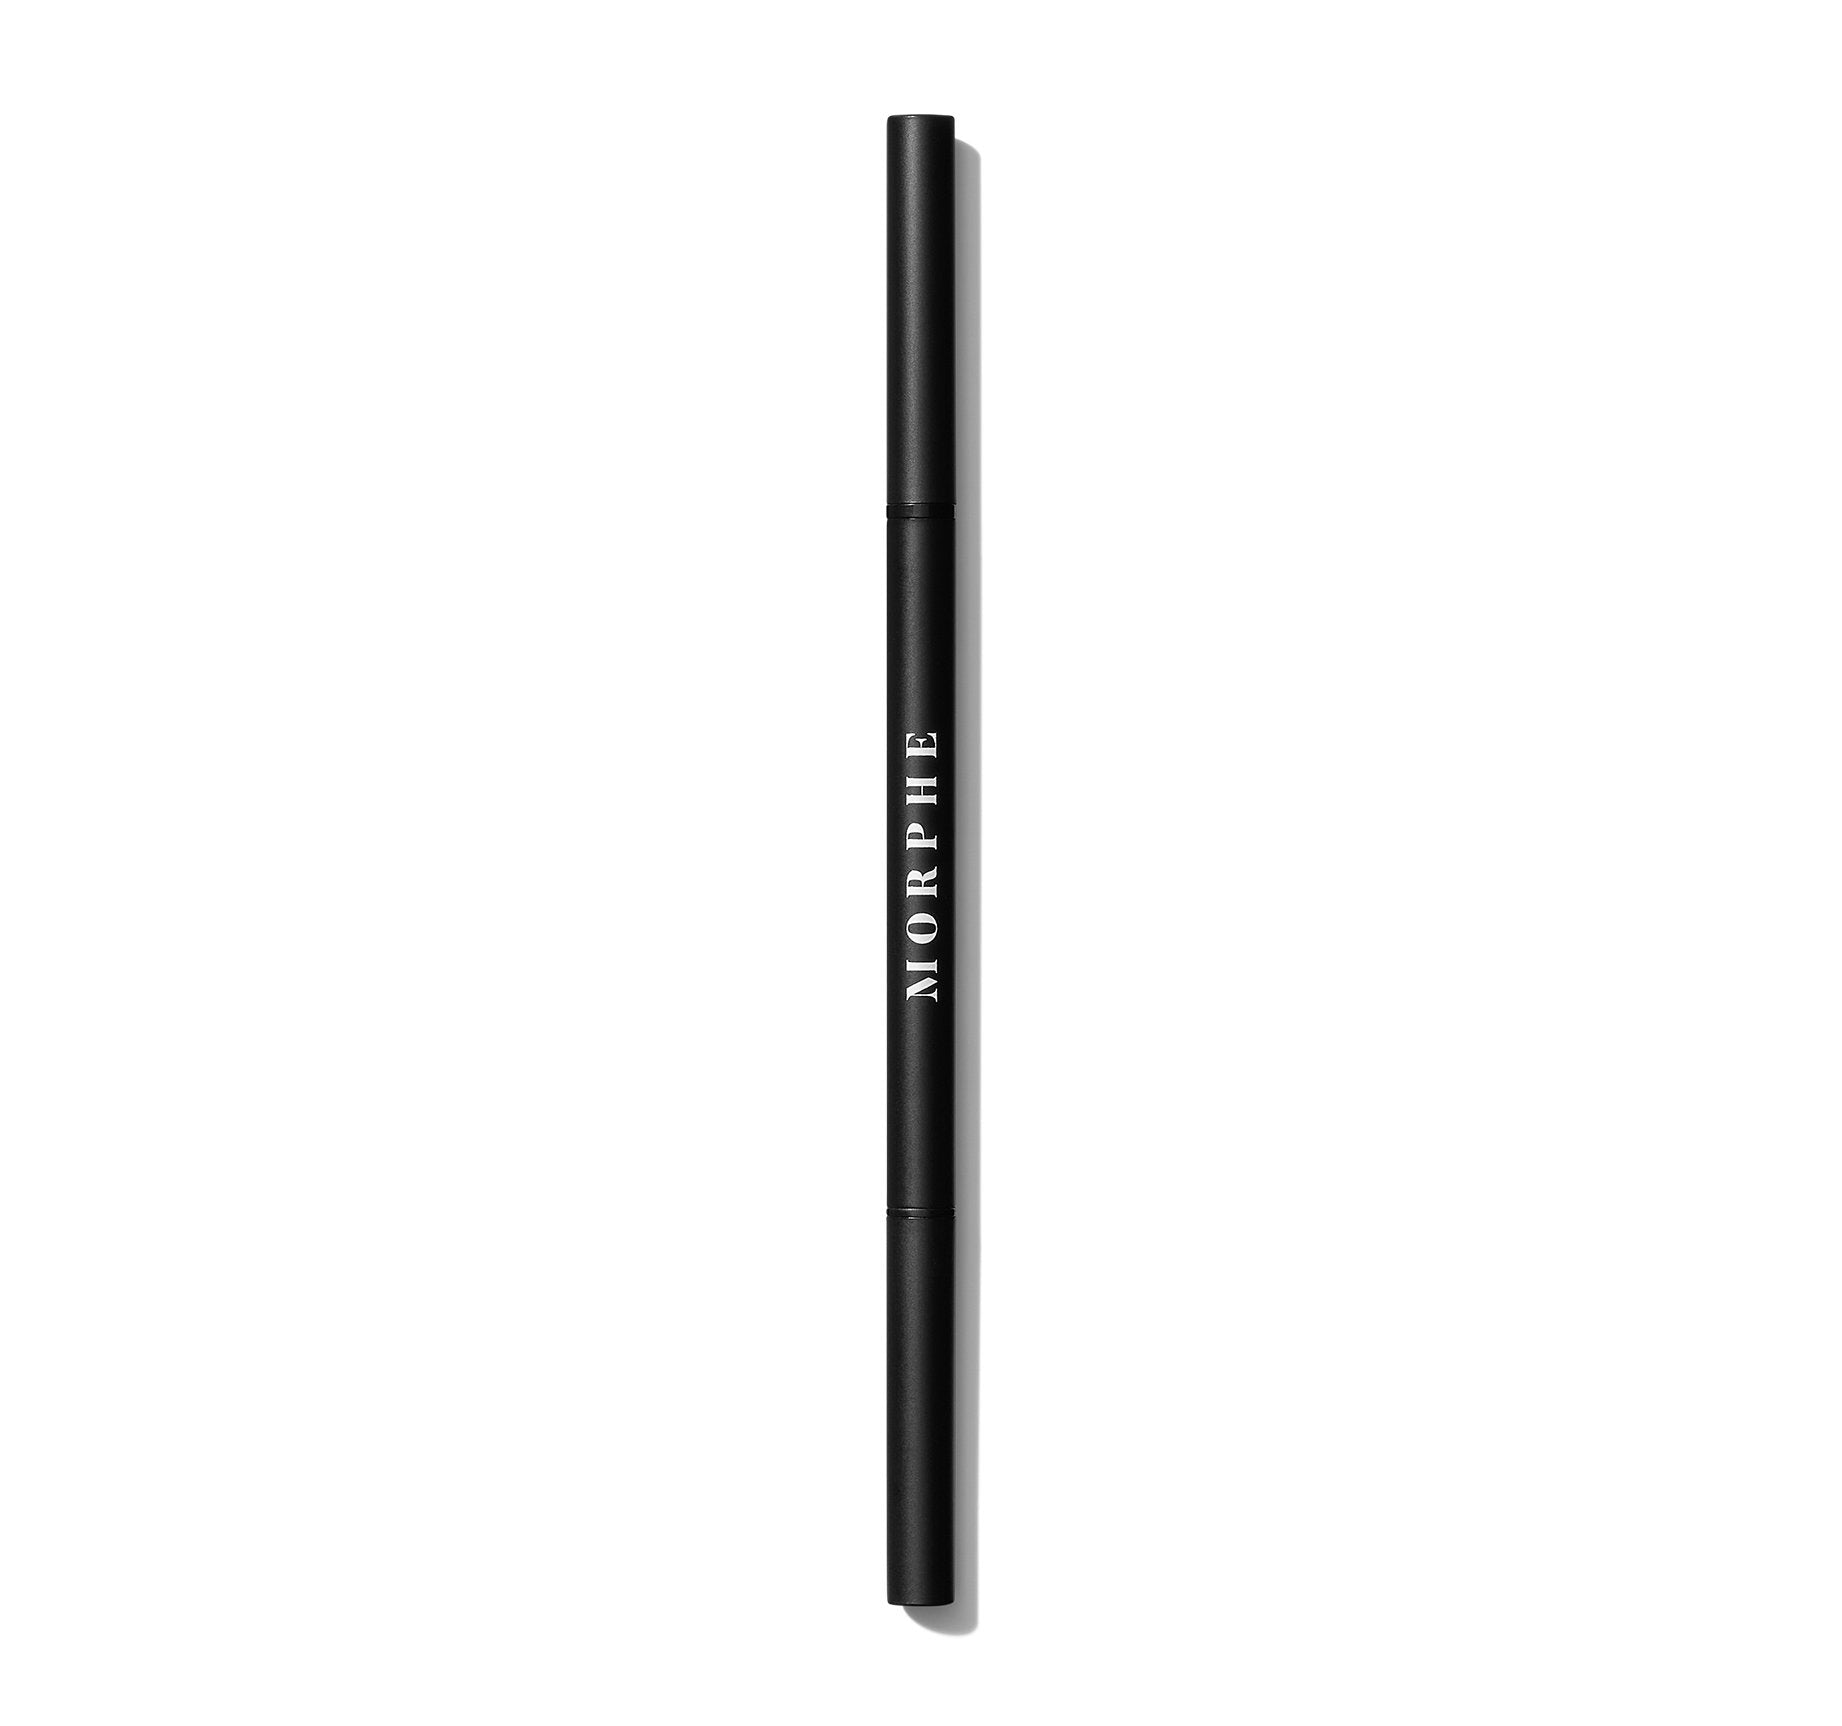 Definer Dual-Ended Brow Pencil & Spoolie - Biscotti - Image 9